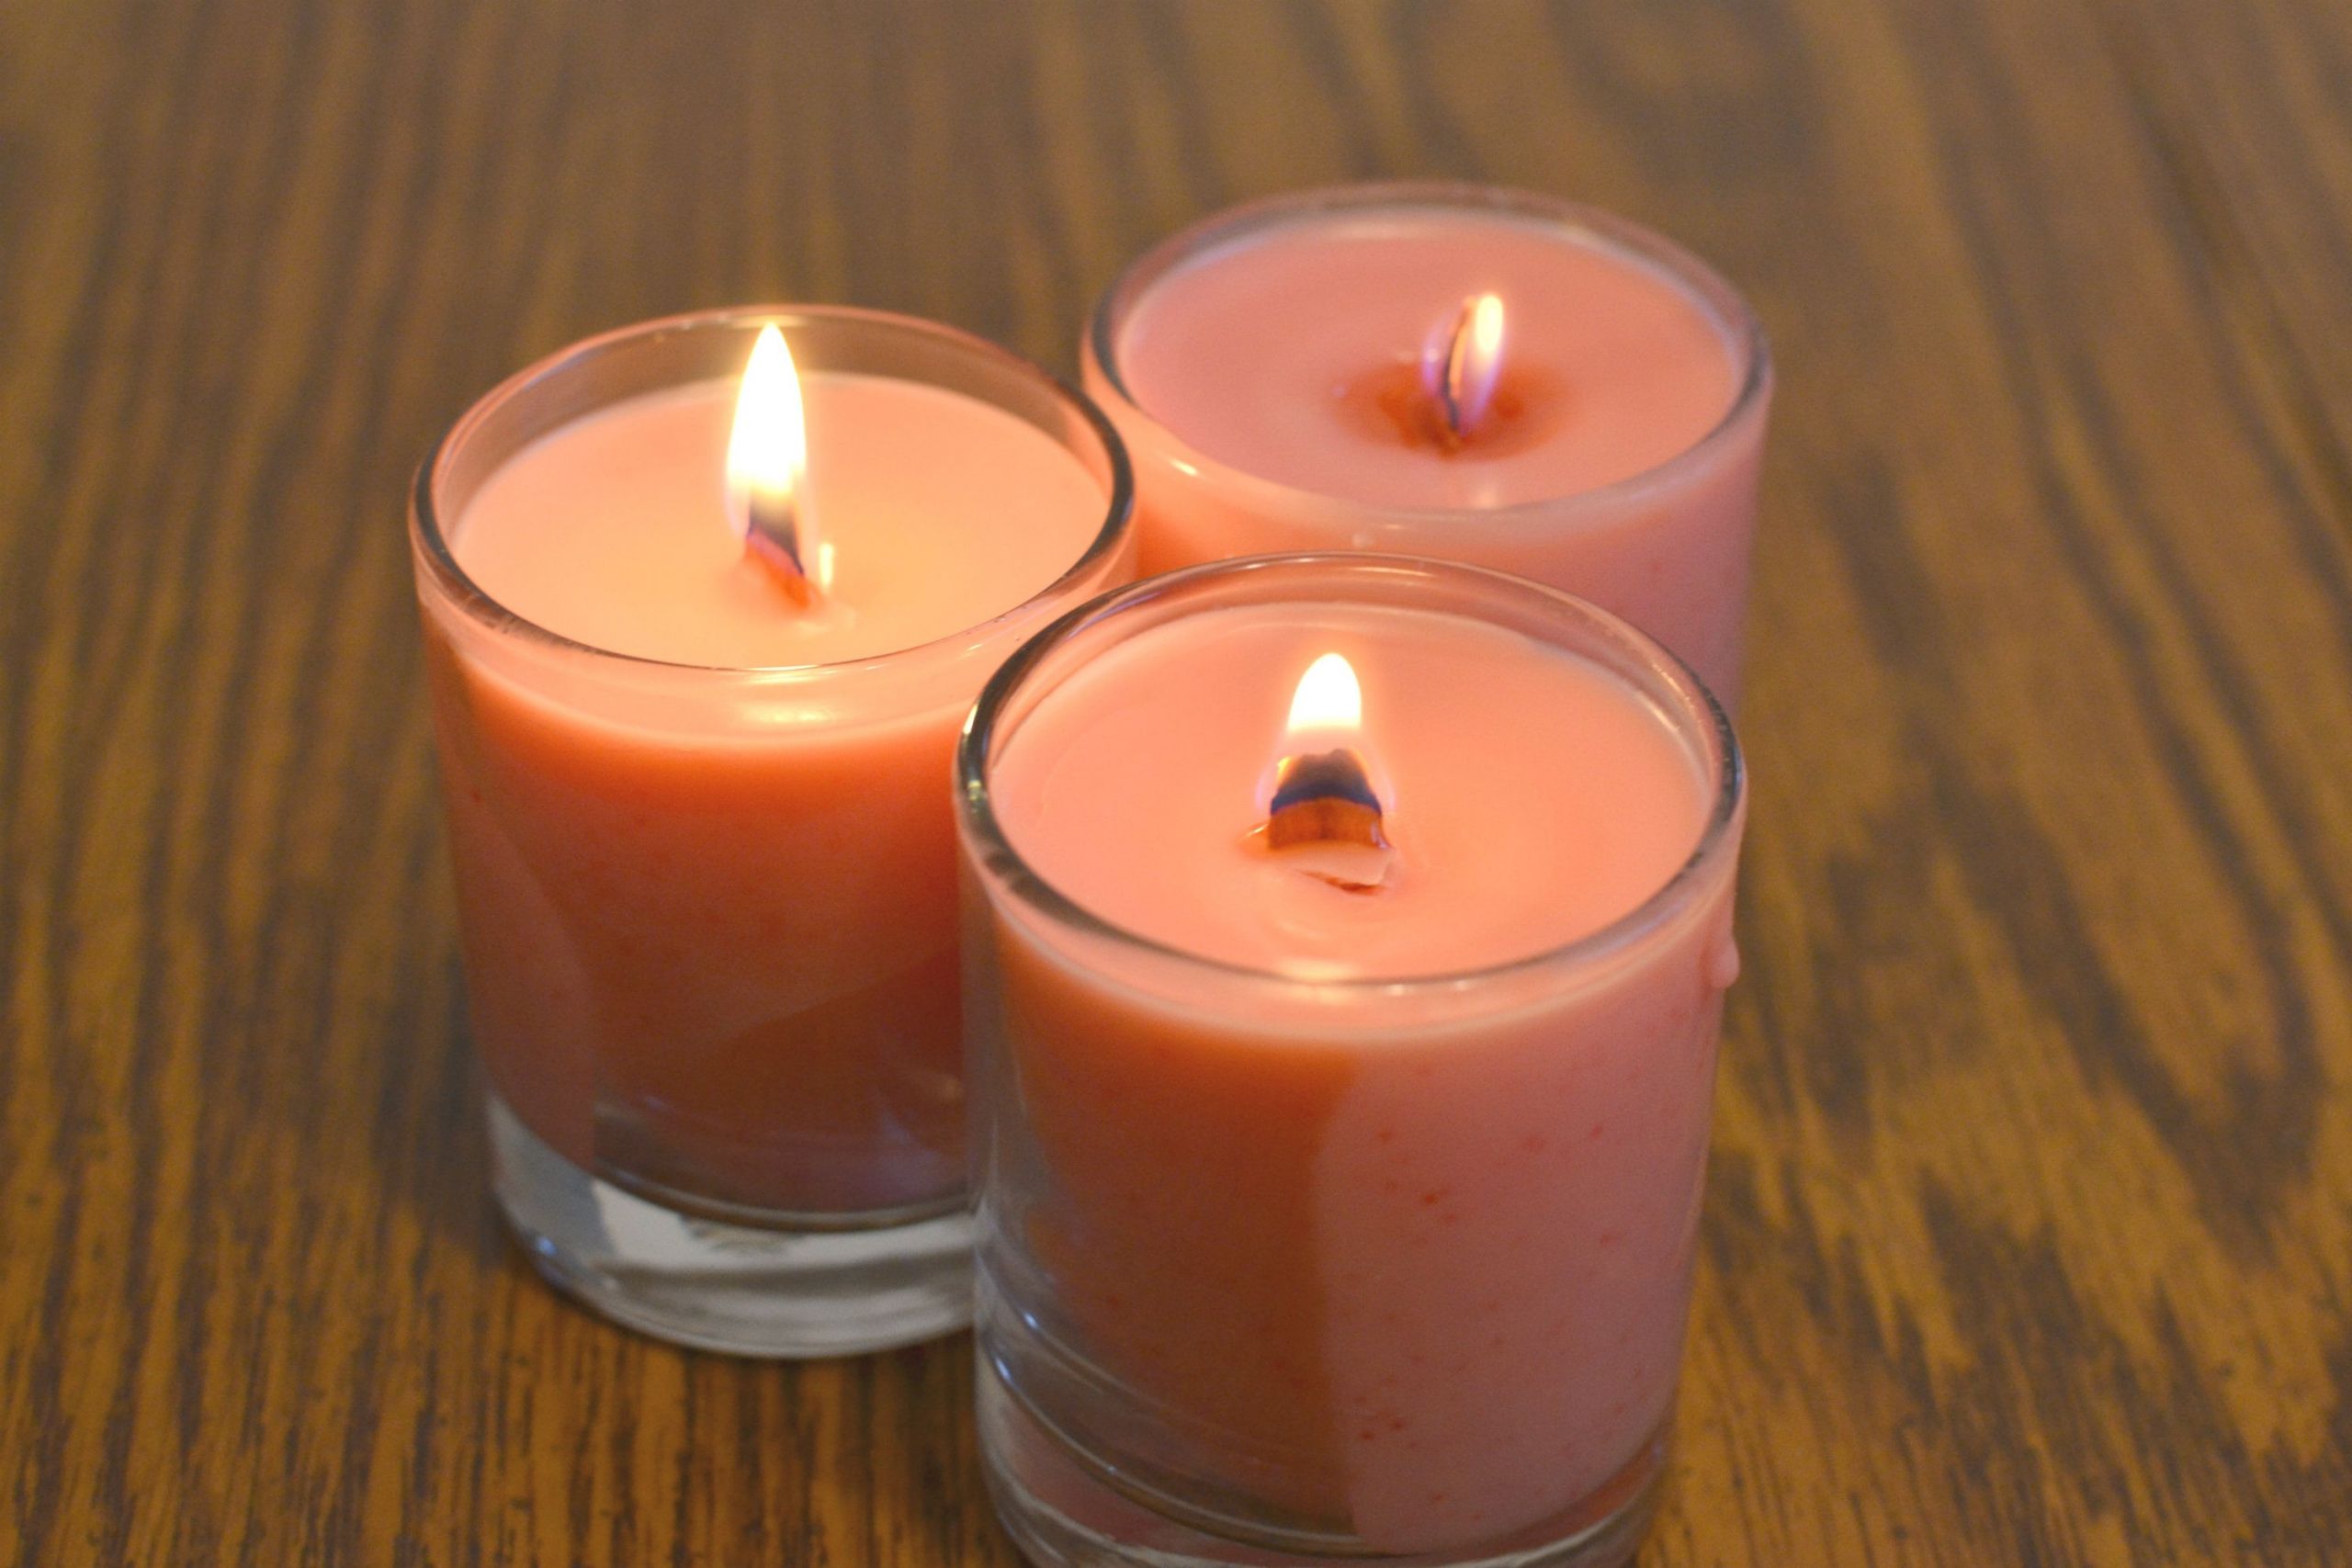 DIY Wood Wick Candles
 How to Make a Wood Wick Candle by Yourself